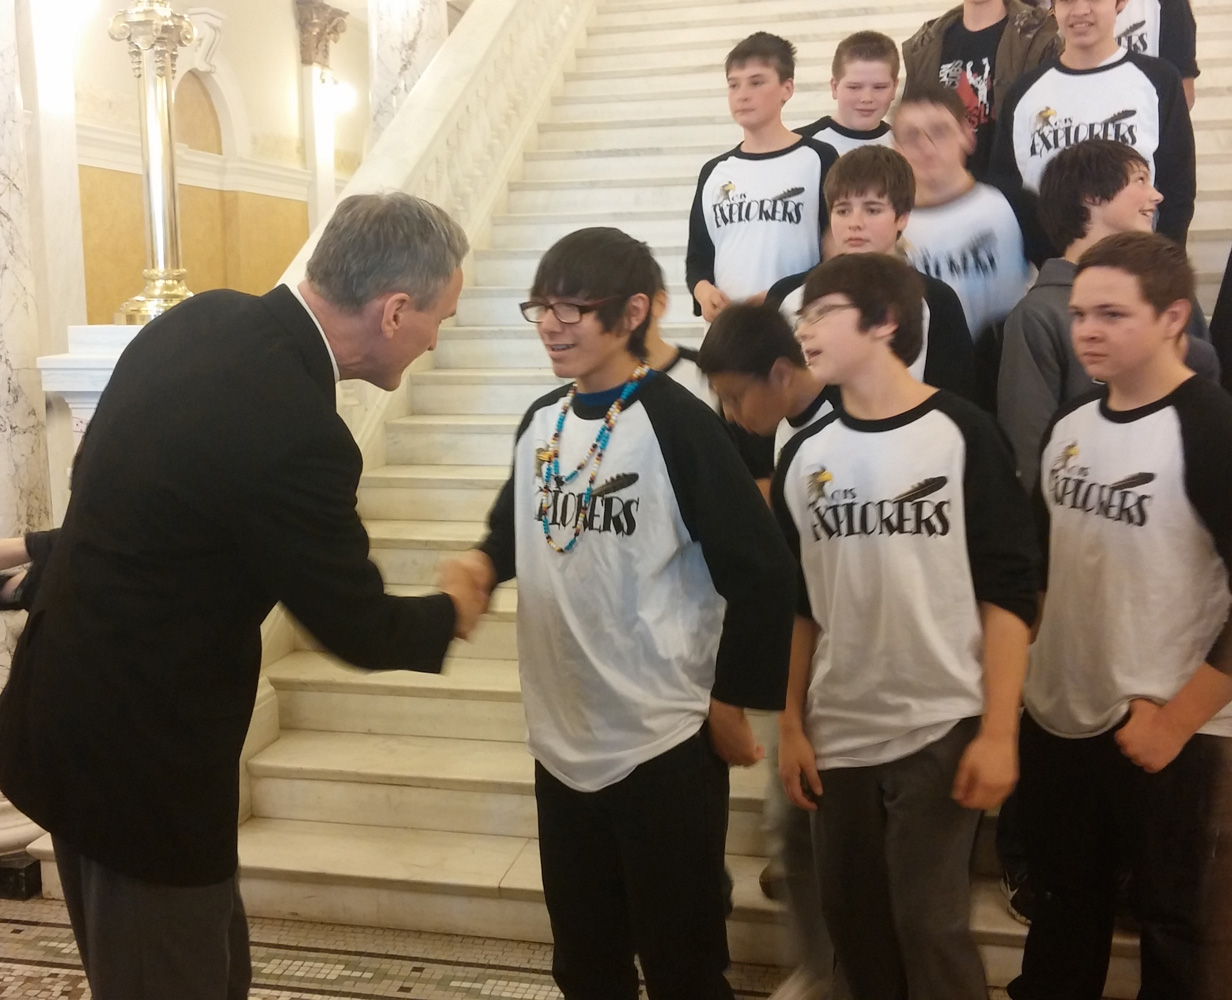 The Explorers met the Governor on their recent trip to Pierre.